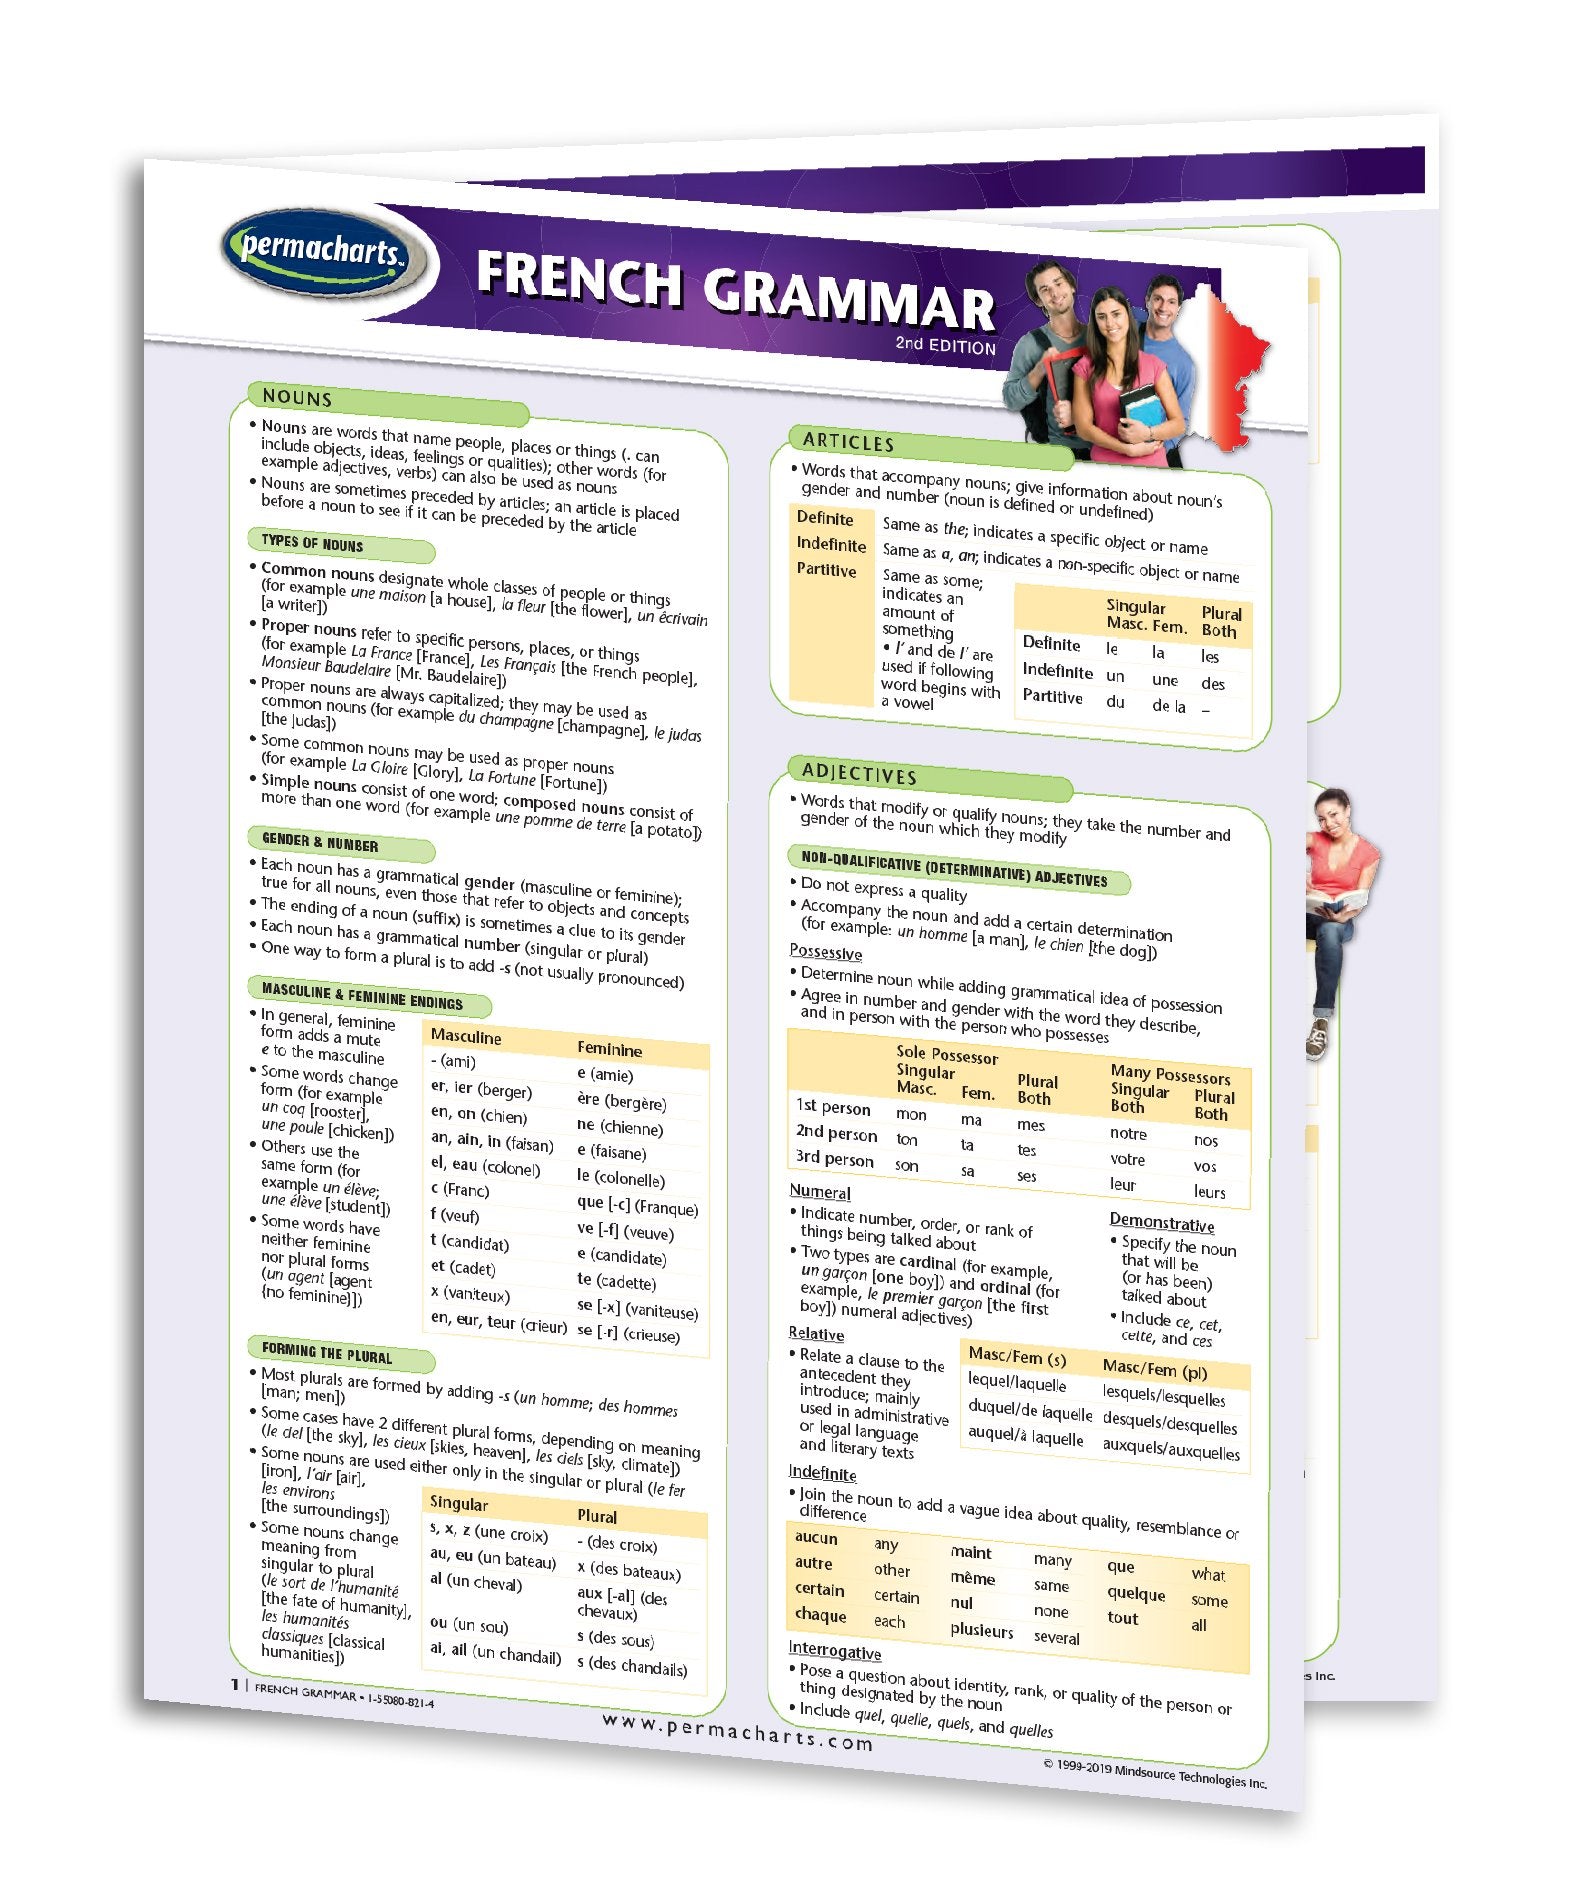 french-grammar-study-guide-quick-reference-resource